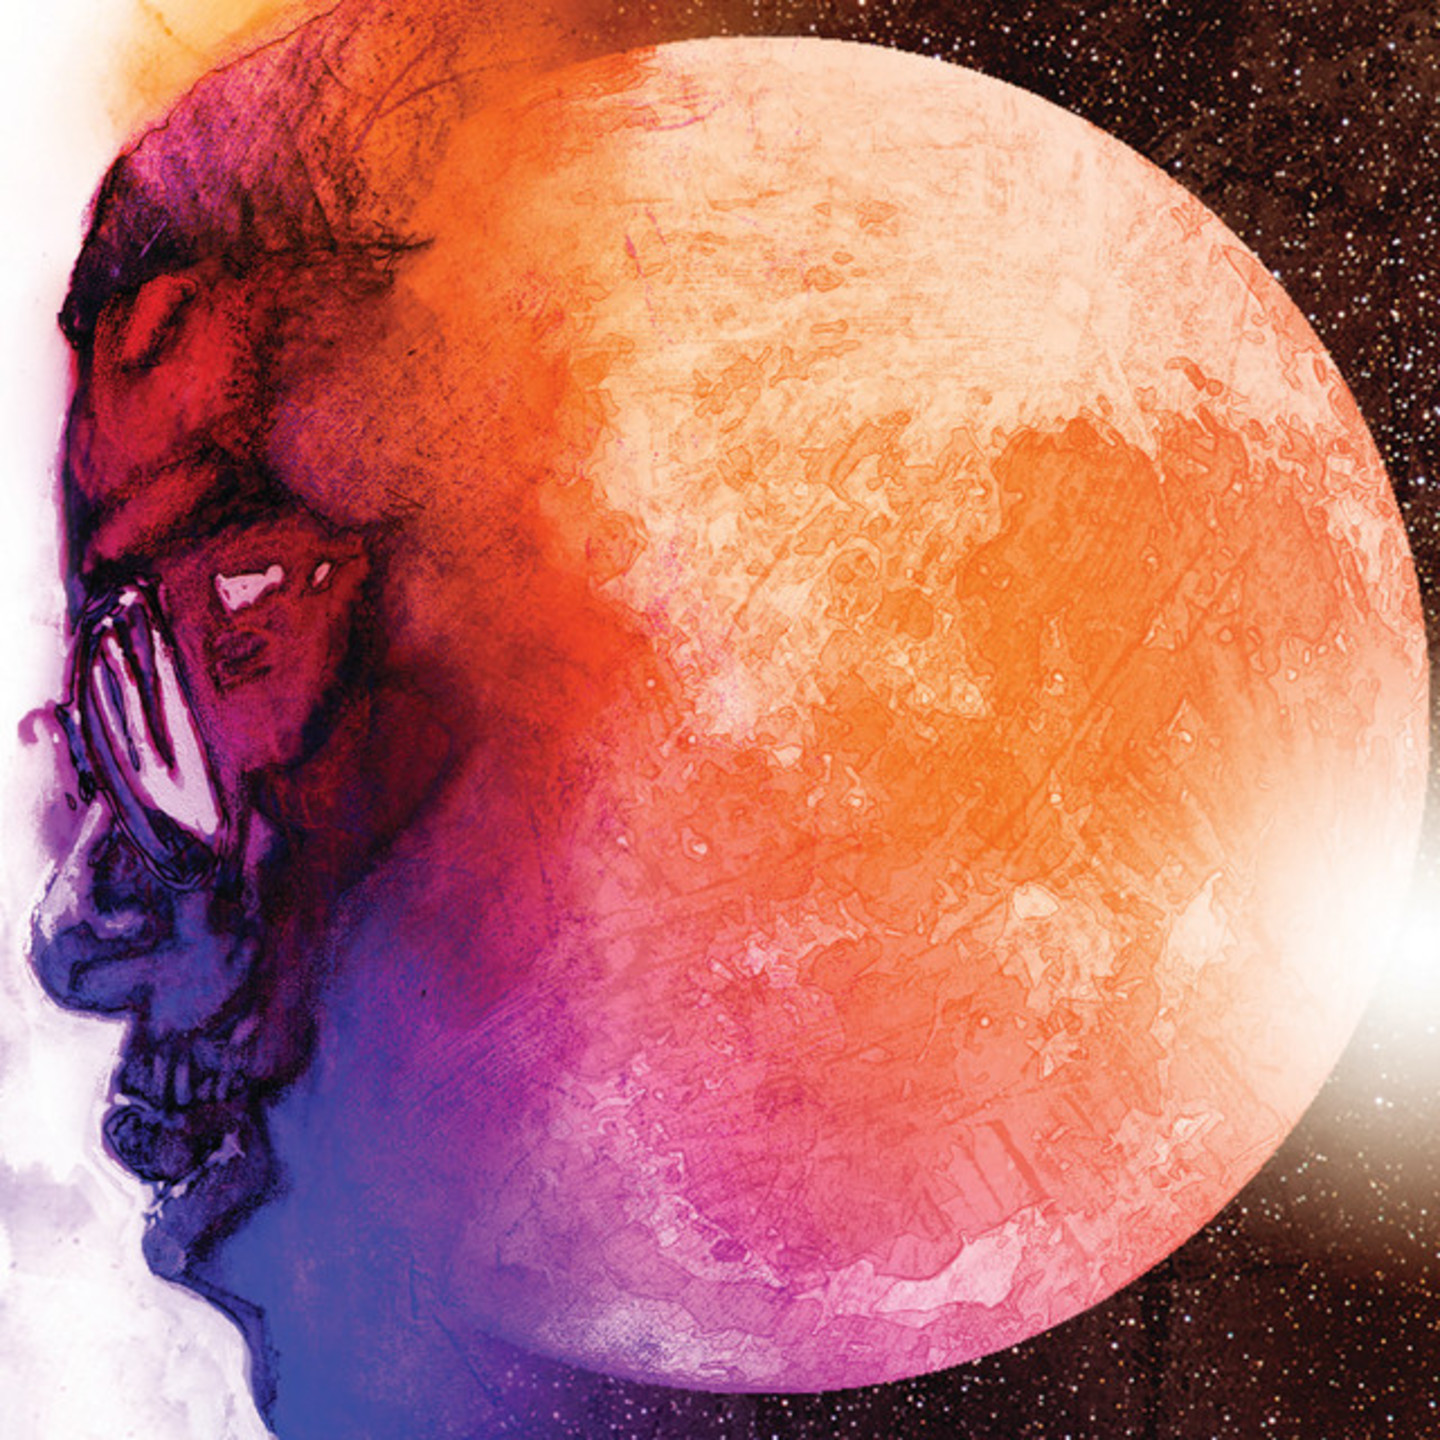 KID CUDI - Man On The Moon The End Of The Day 2xLP